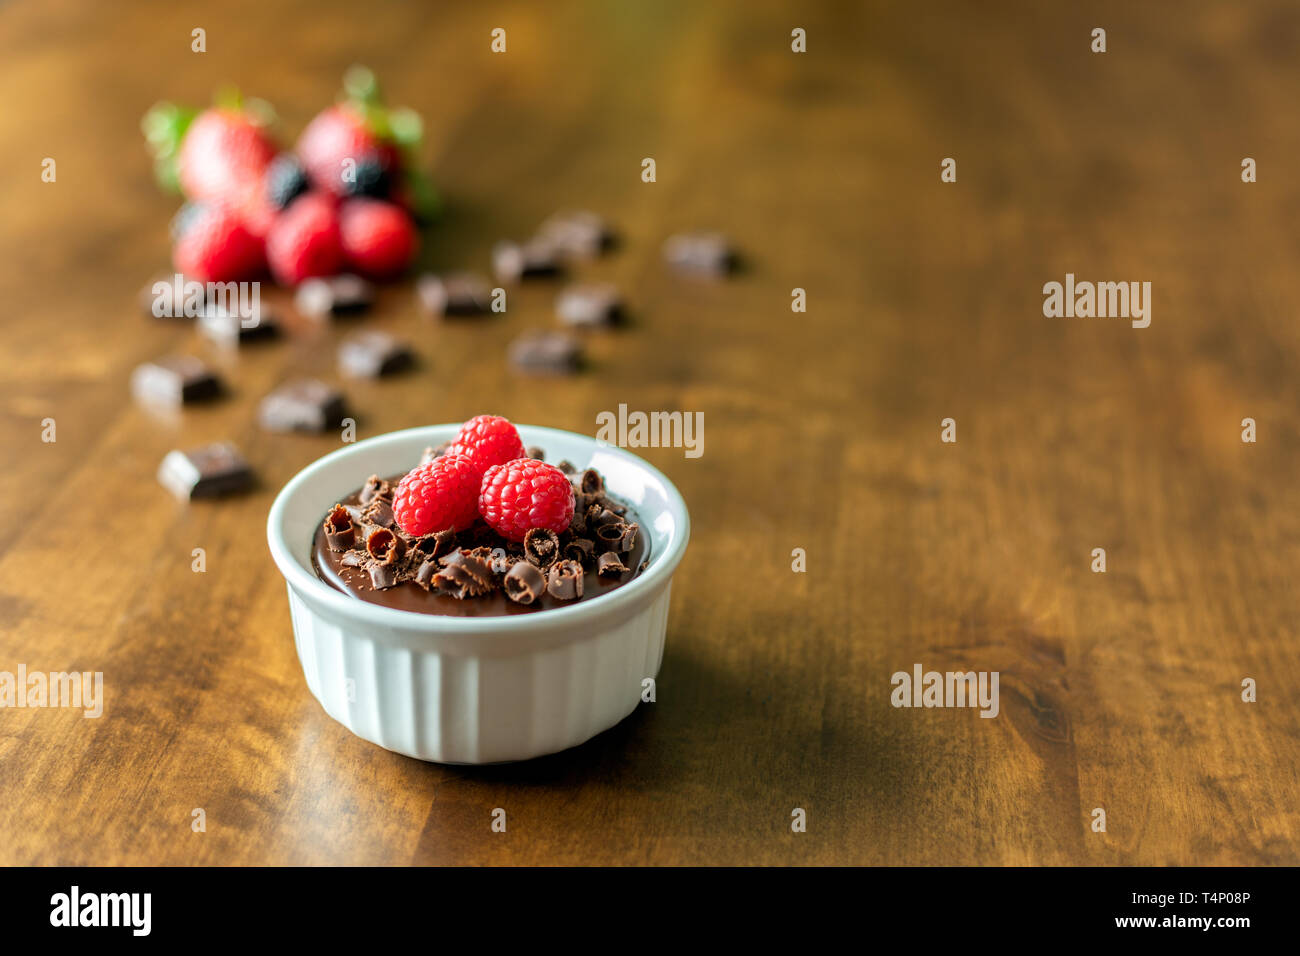 A decadent Chocolate Mousse Cake with chocolate ganache and topped with Raspberries, Blackberries and chocolate curls on a wood table in a ramekin dis Stock Photo